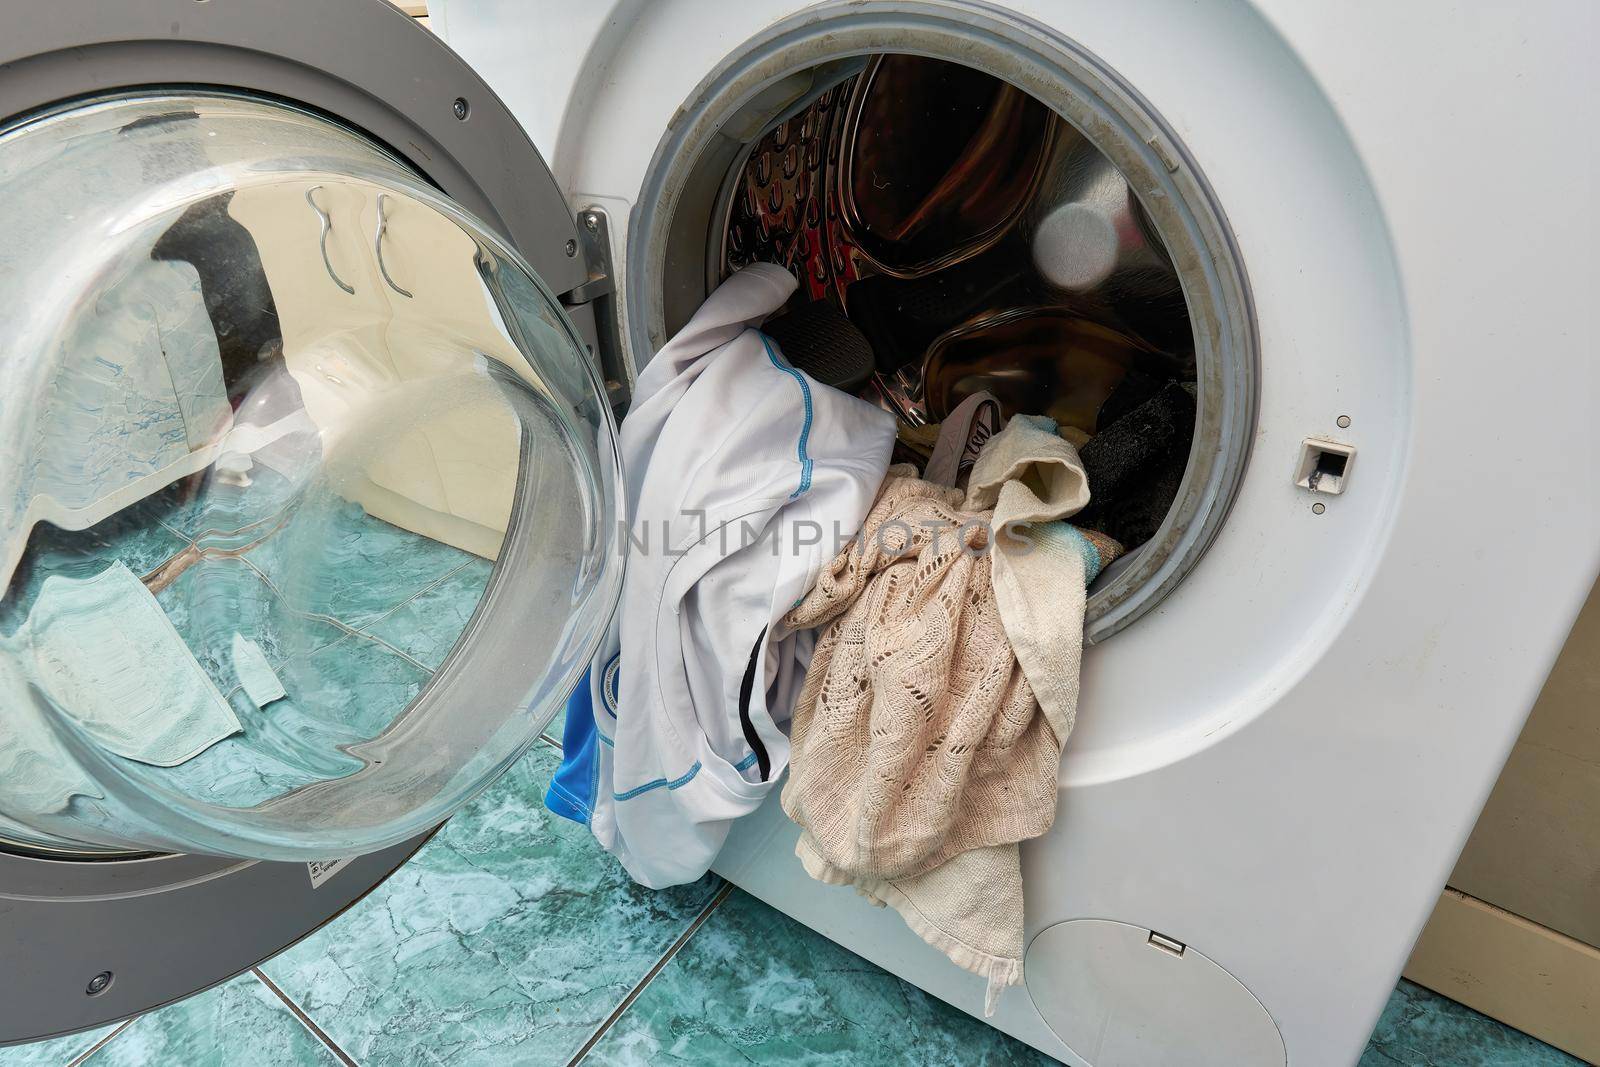 Washing machine with an open door and dirty laundry placed in the washing drum, close up.